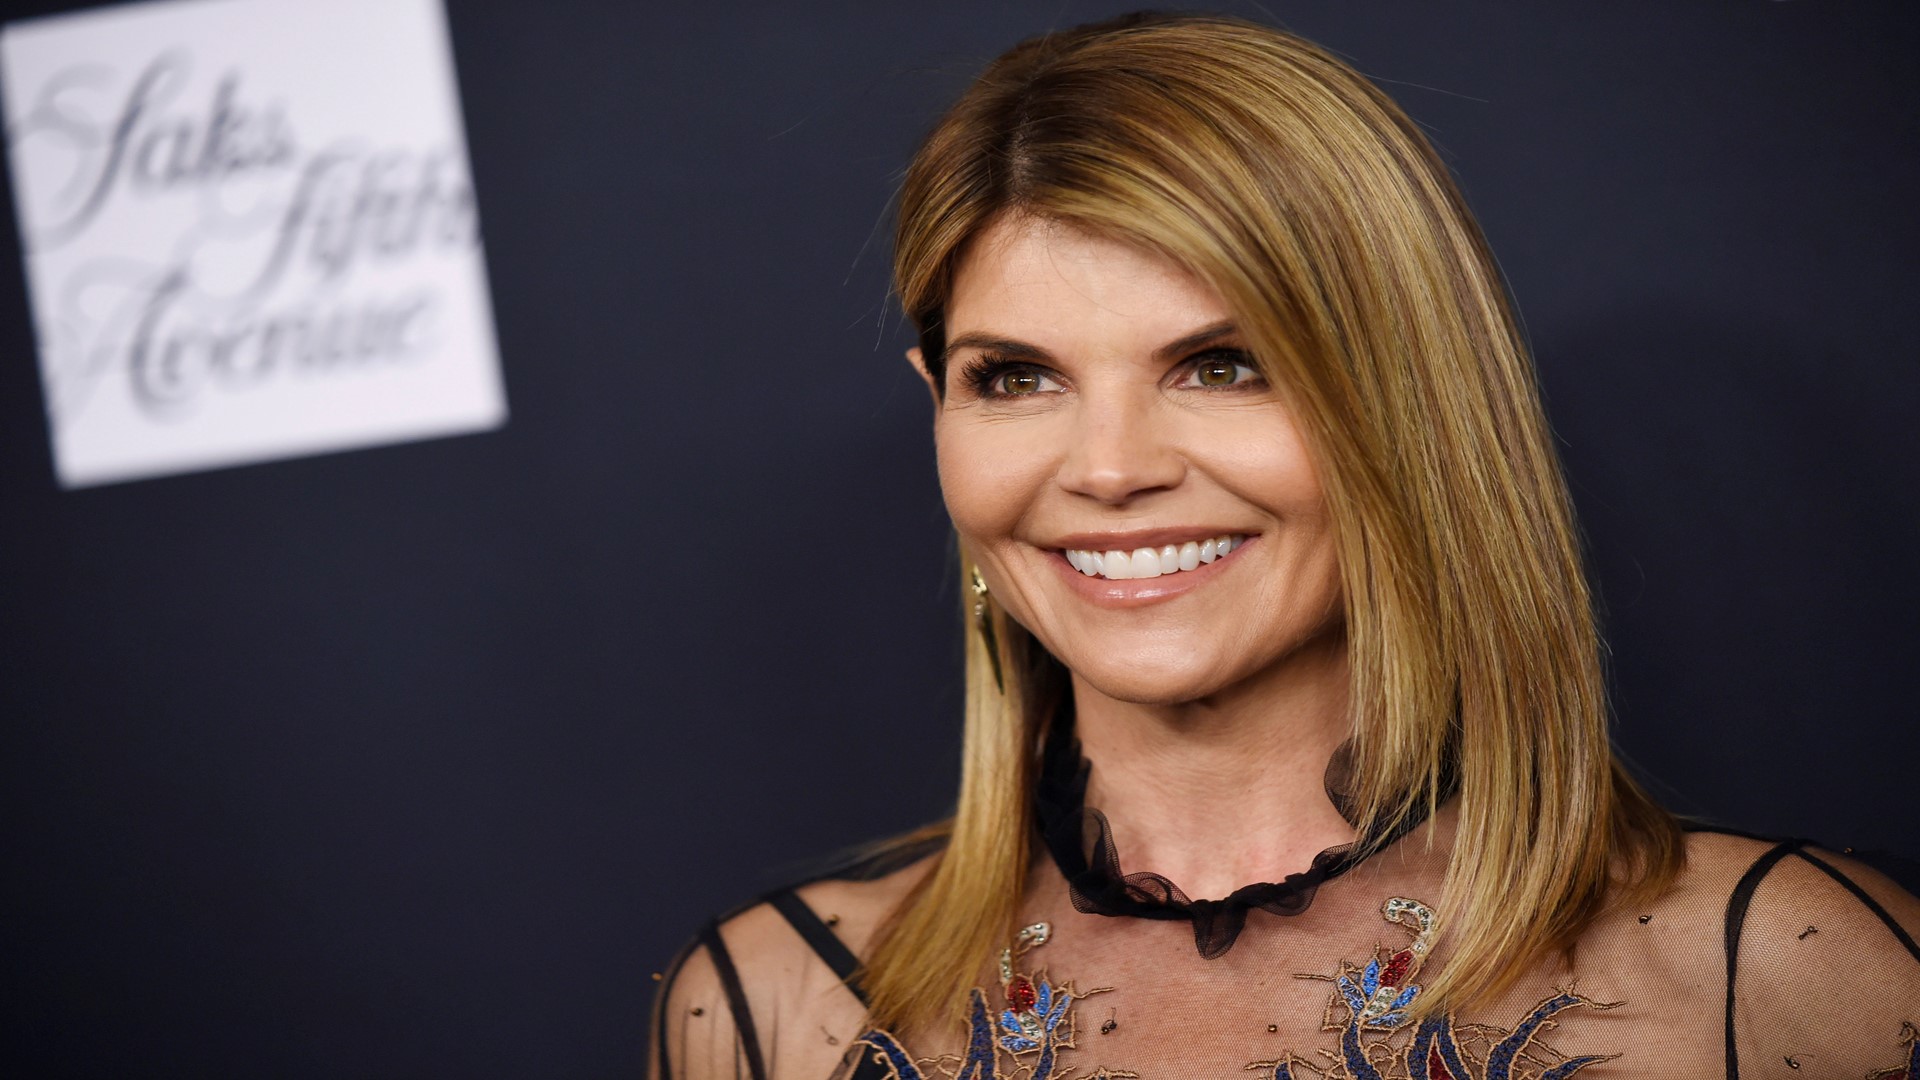 Actress Lori Loughlin and her fashion designer husband, Mossimo Giannulli, have agreed to plead guilty to charges in the college admissions bribery scandal.